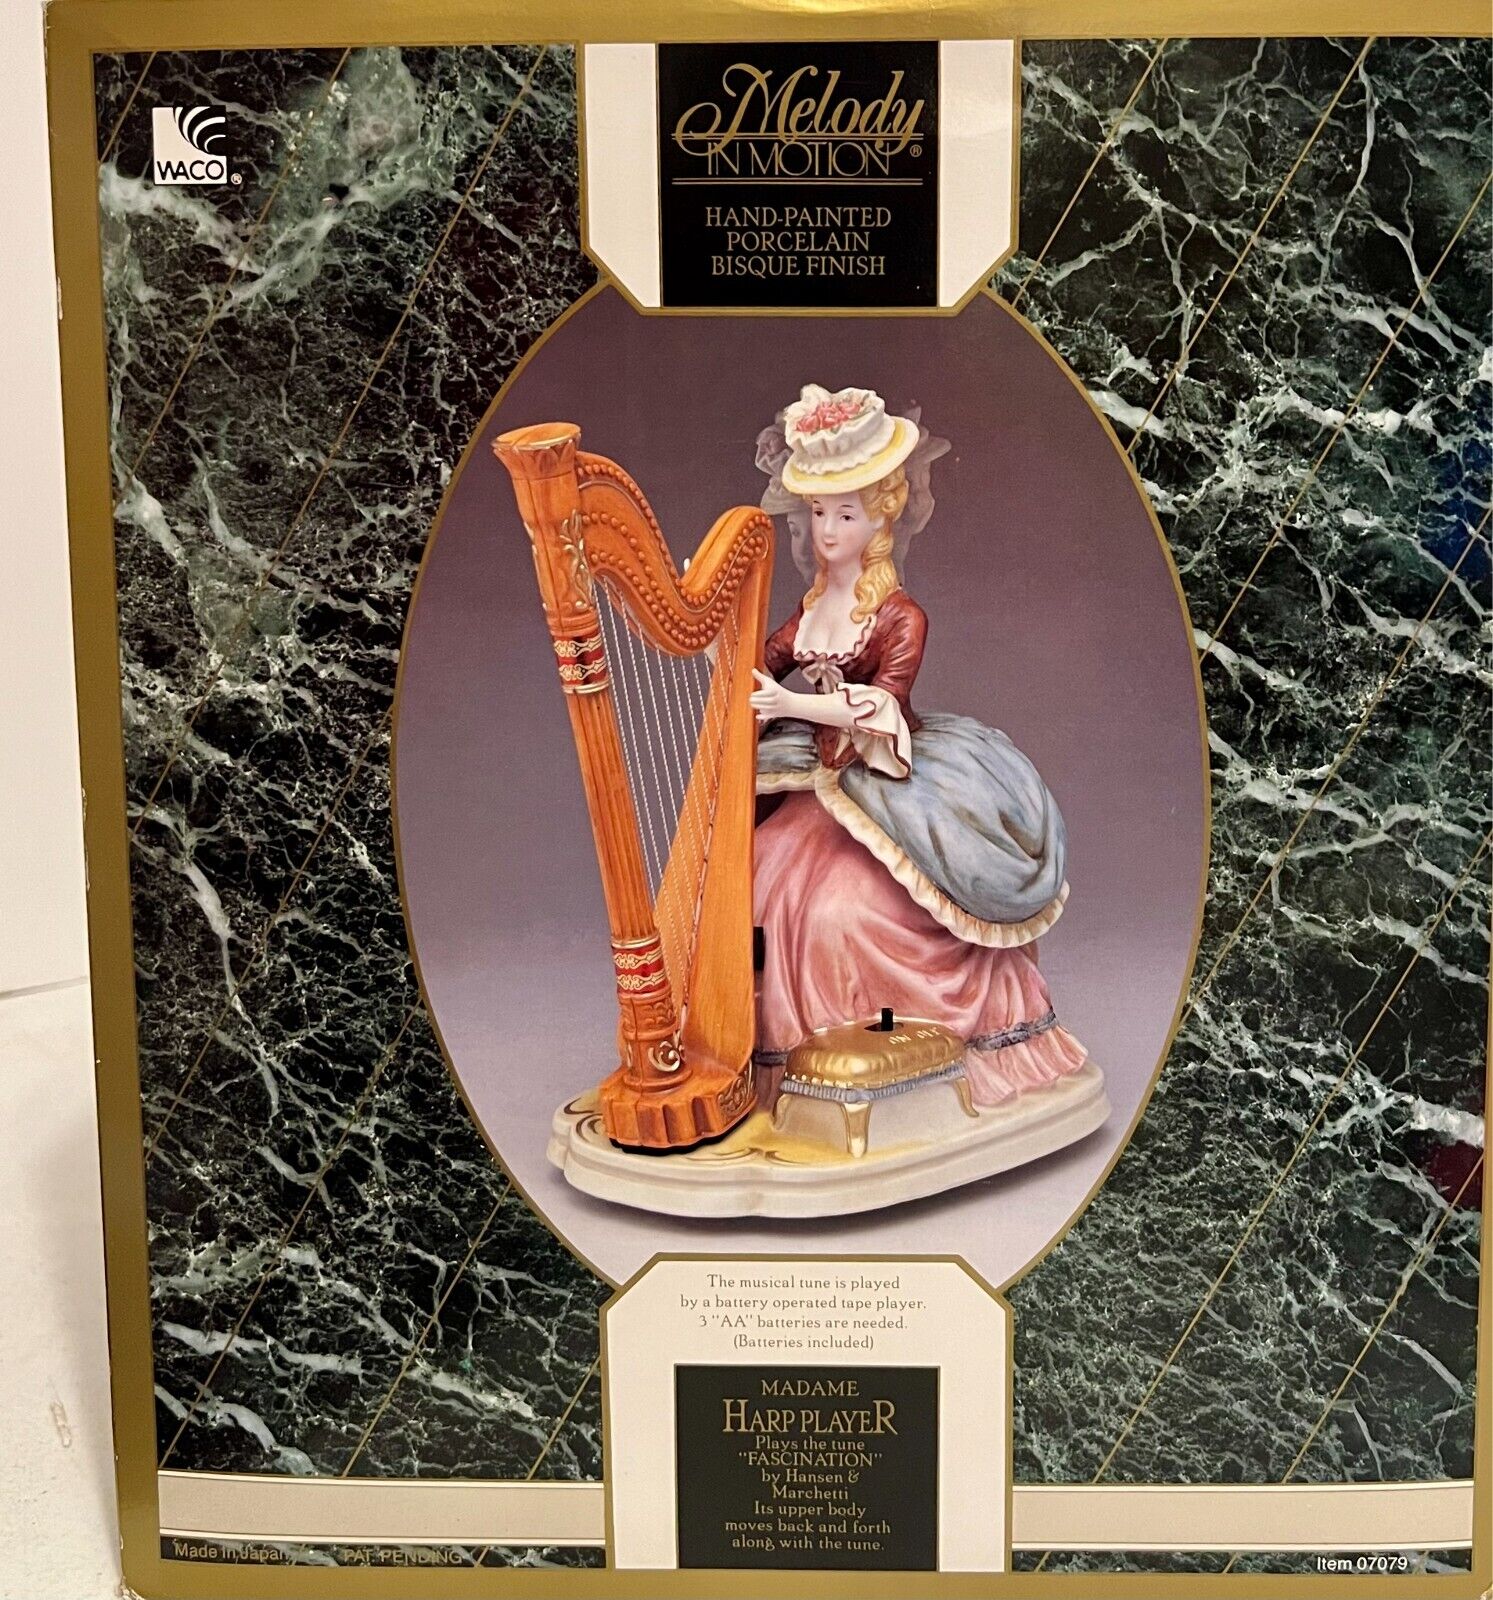 Melody In Motion Porcelain Musical Madame Harp Player   Waco Japan Working